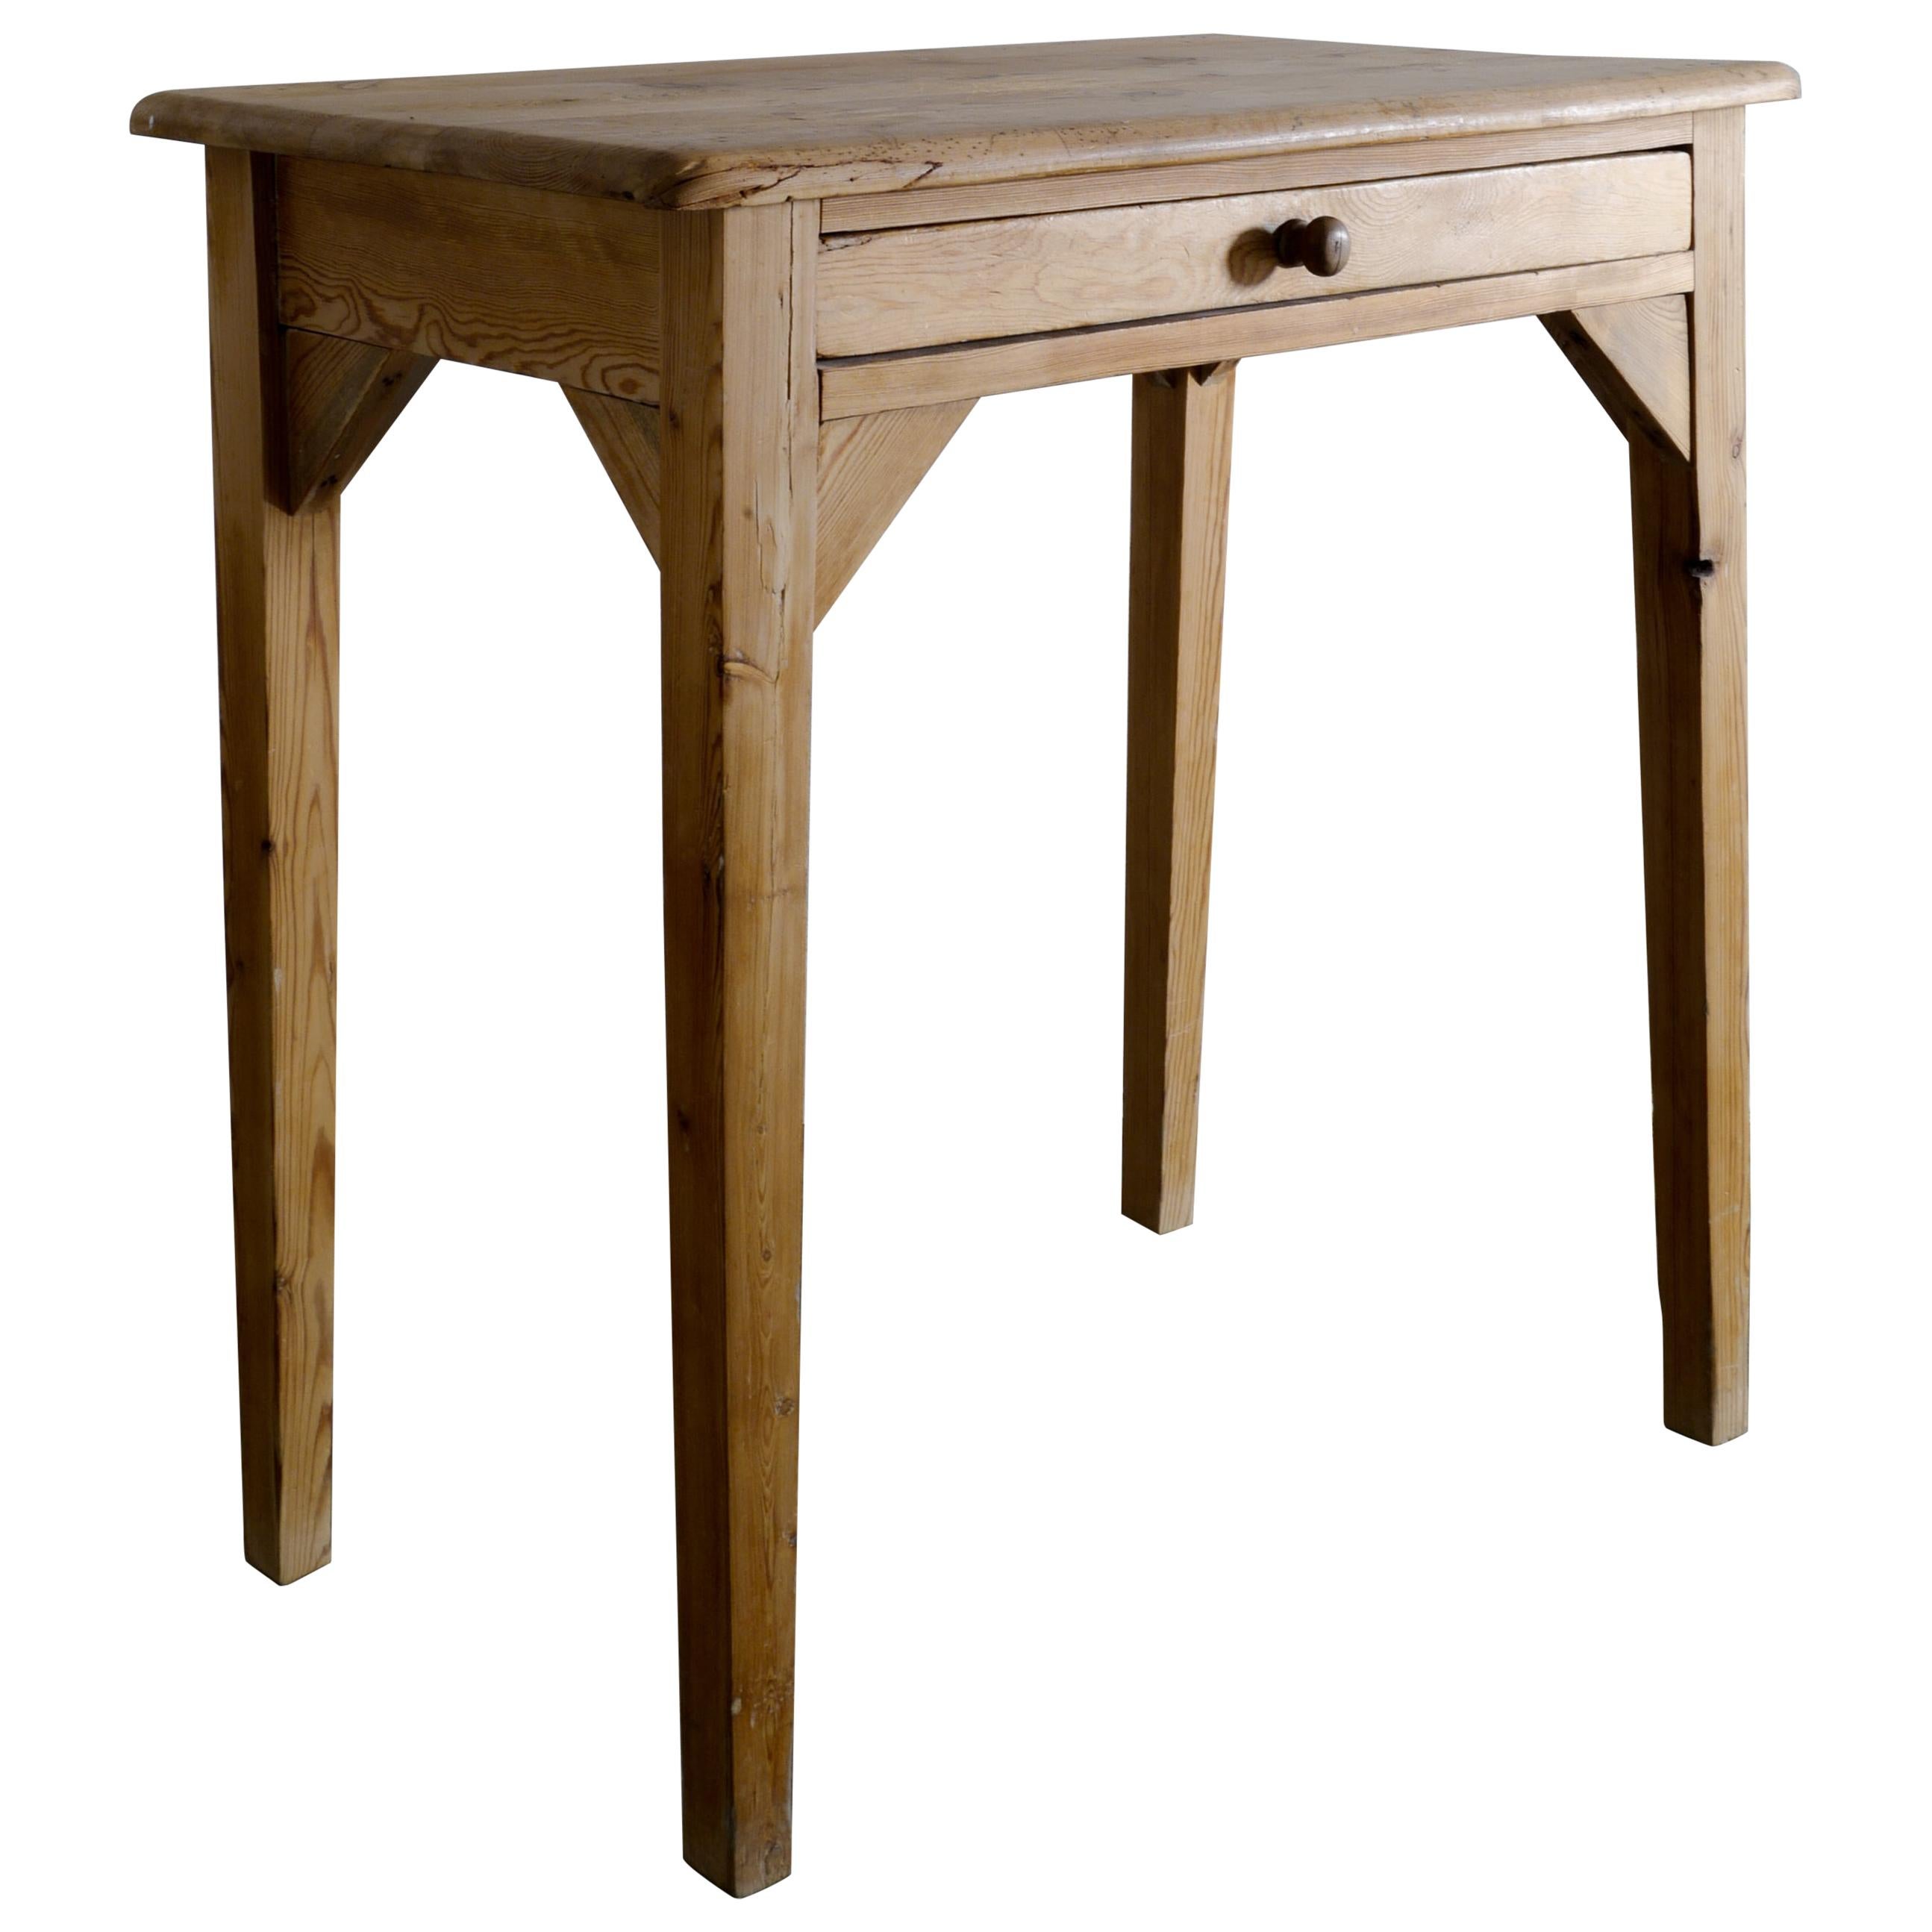 Swedish Console Table in Solid Pine, 1800s